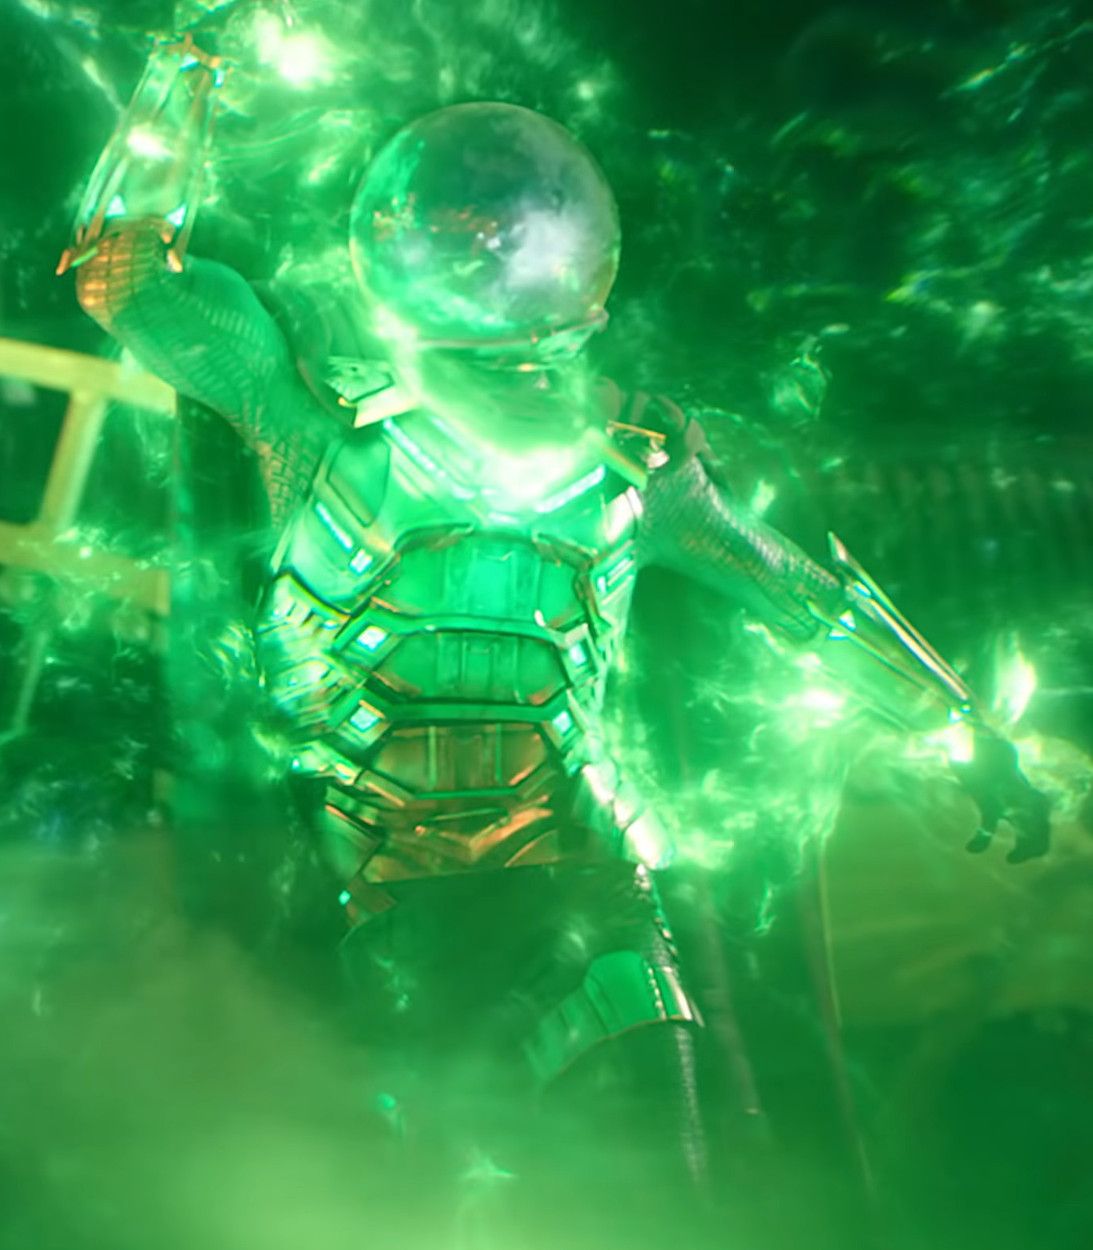 Jake Gyllenhaal As Mysterio In Spider-Man Far From Home